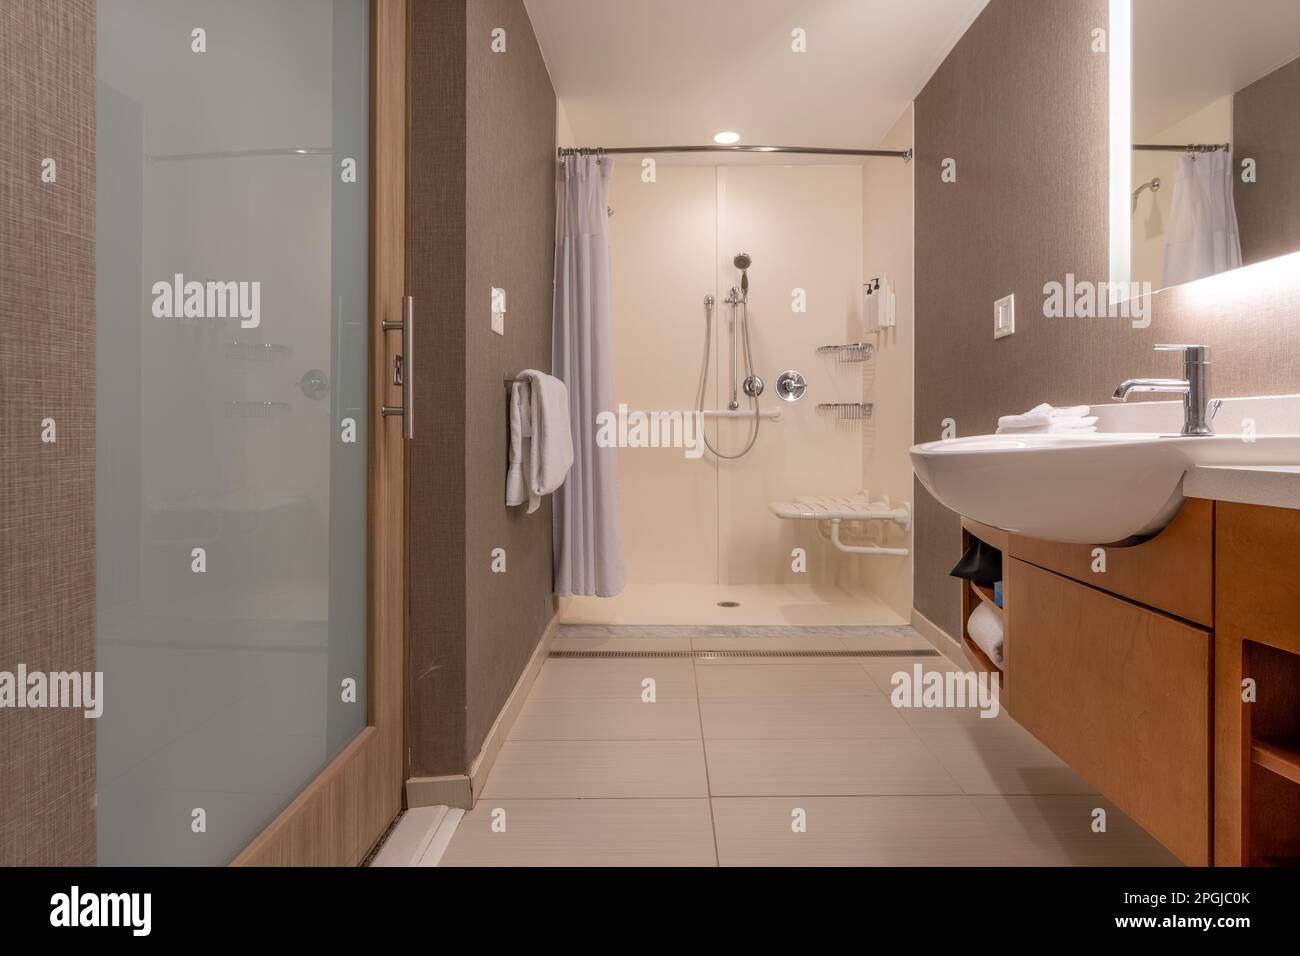 Wheelchair accessible hotel bathroom shower with tile floor and walls. Stock Photo